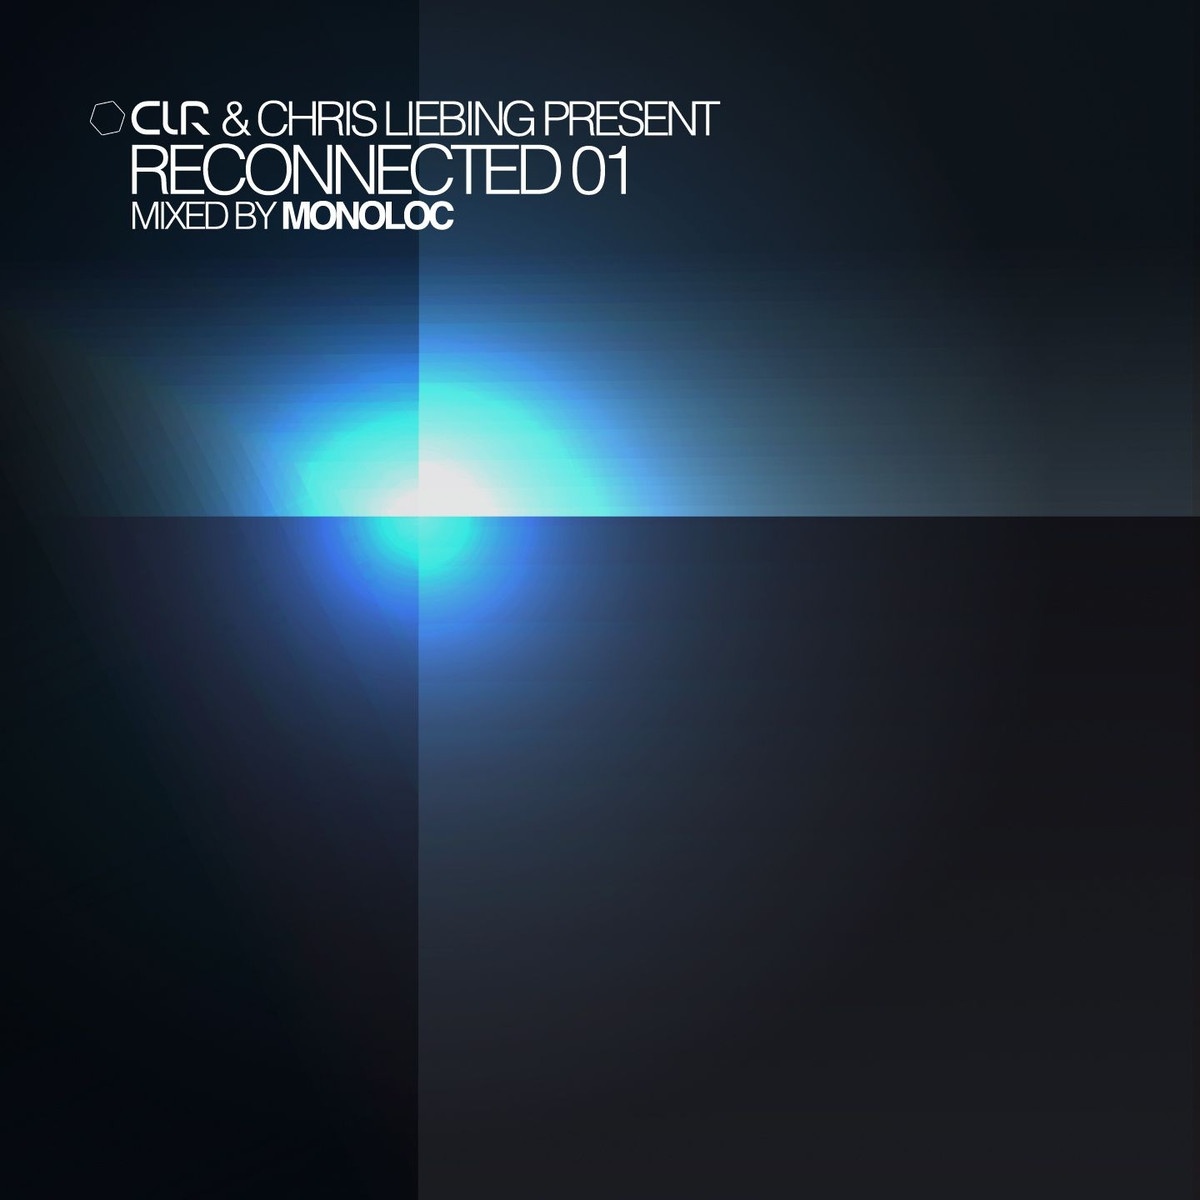 CLR & Chris Liebing present Reconnected 01 (Mixed by Monoloc)